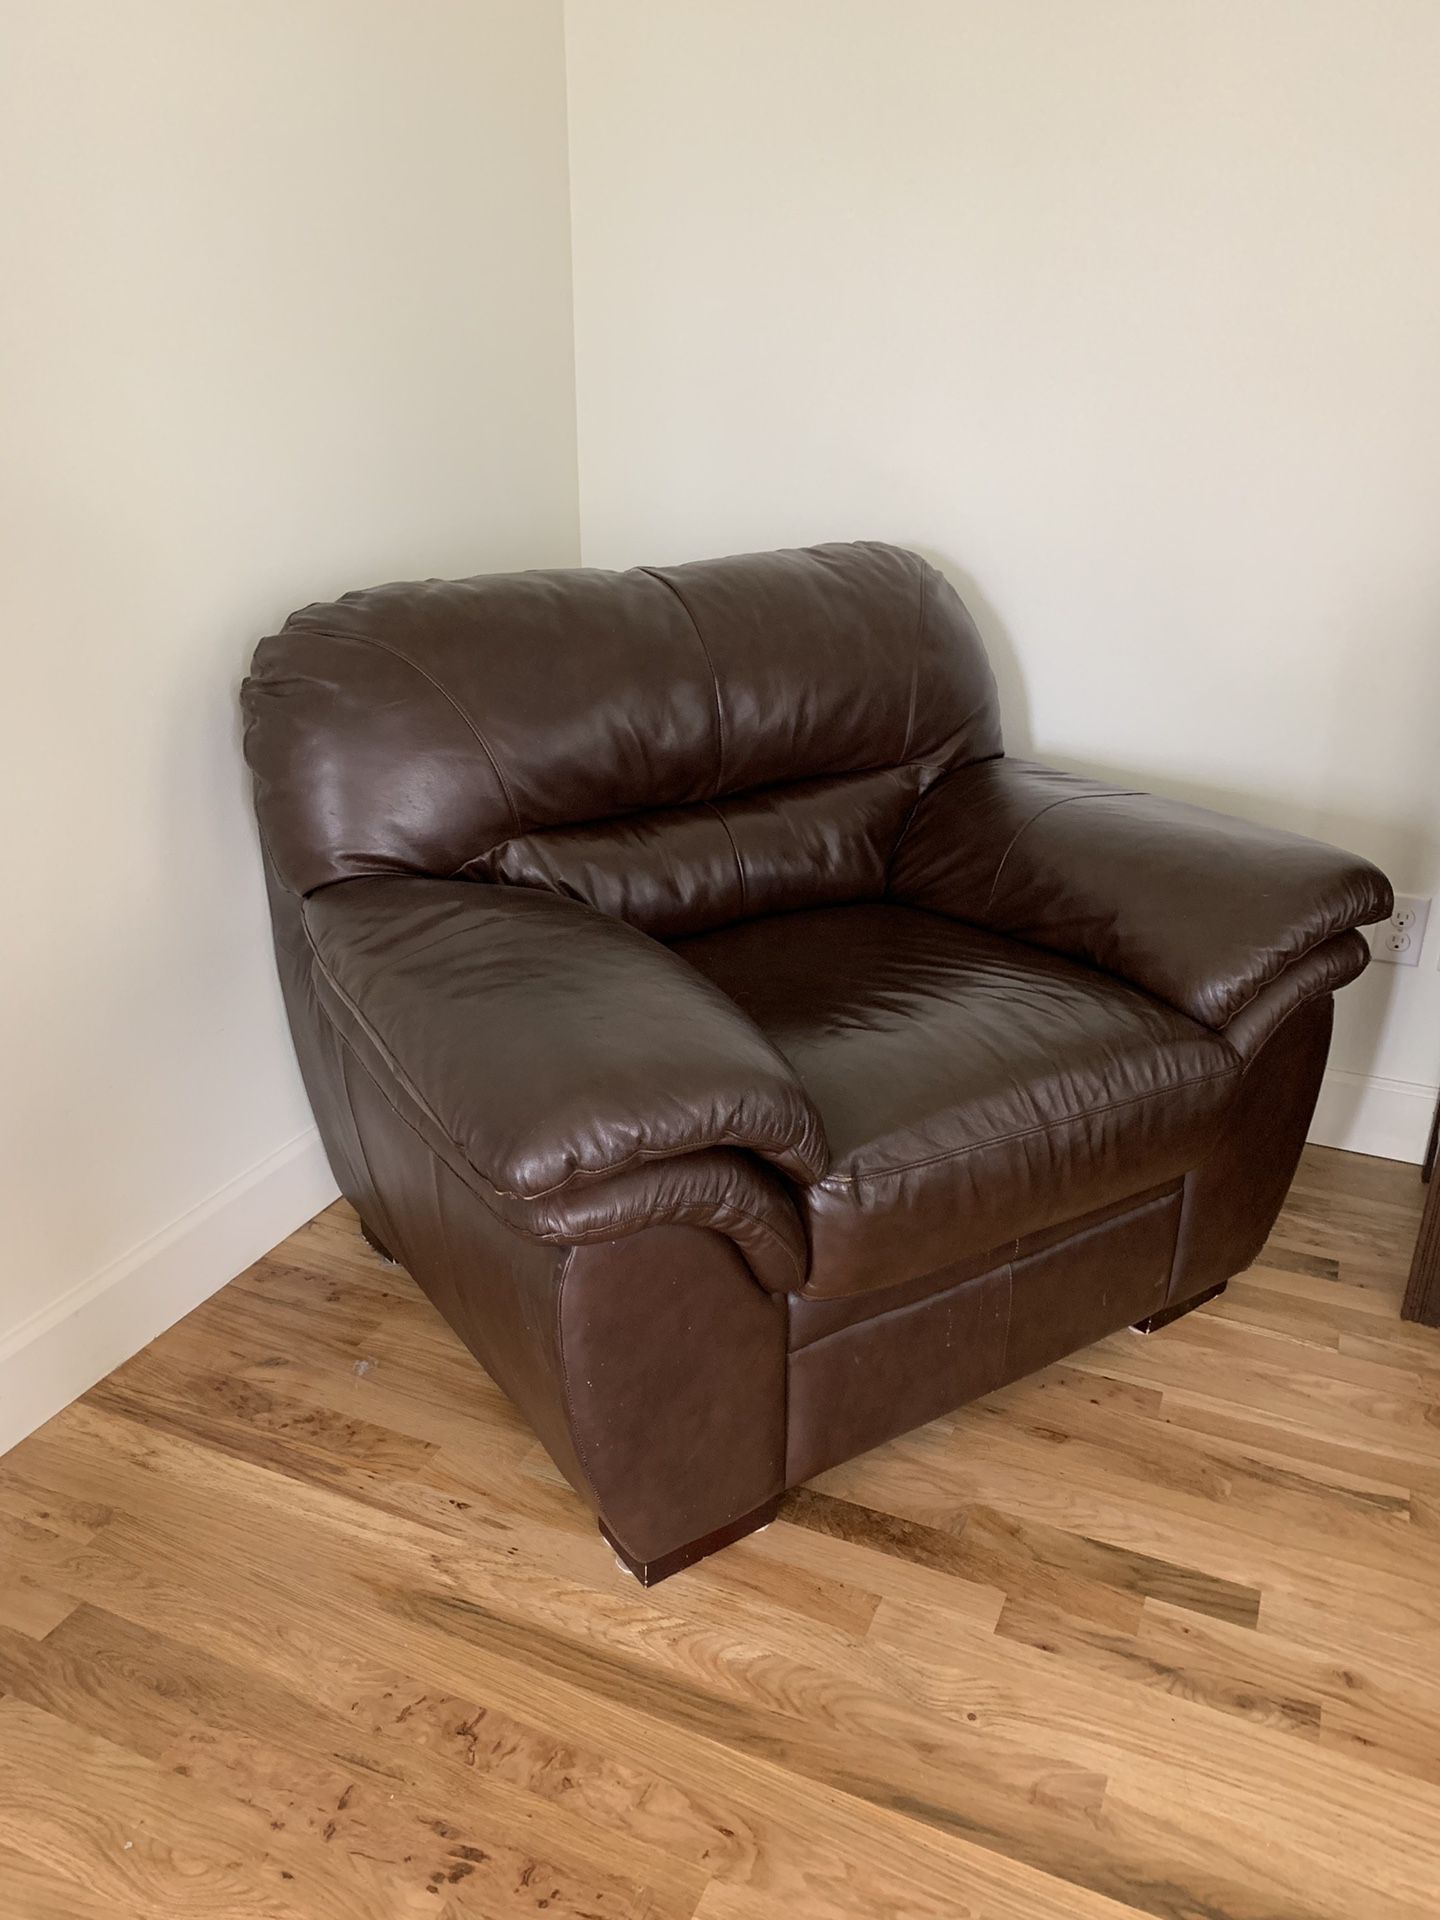 *FREE* Durable synthetic leather chair